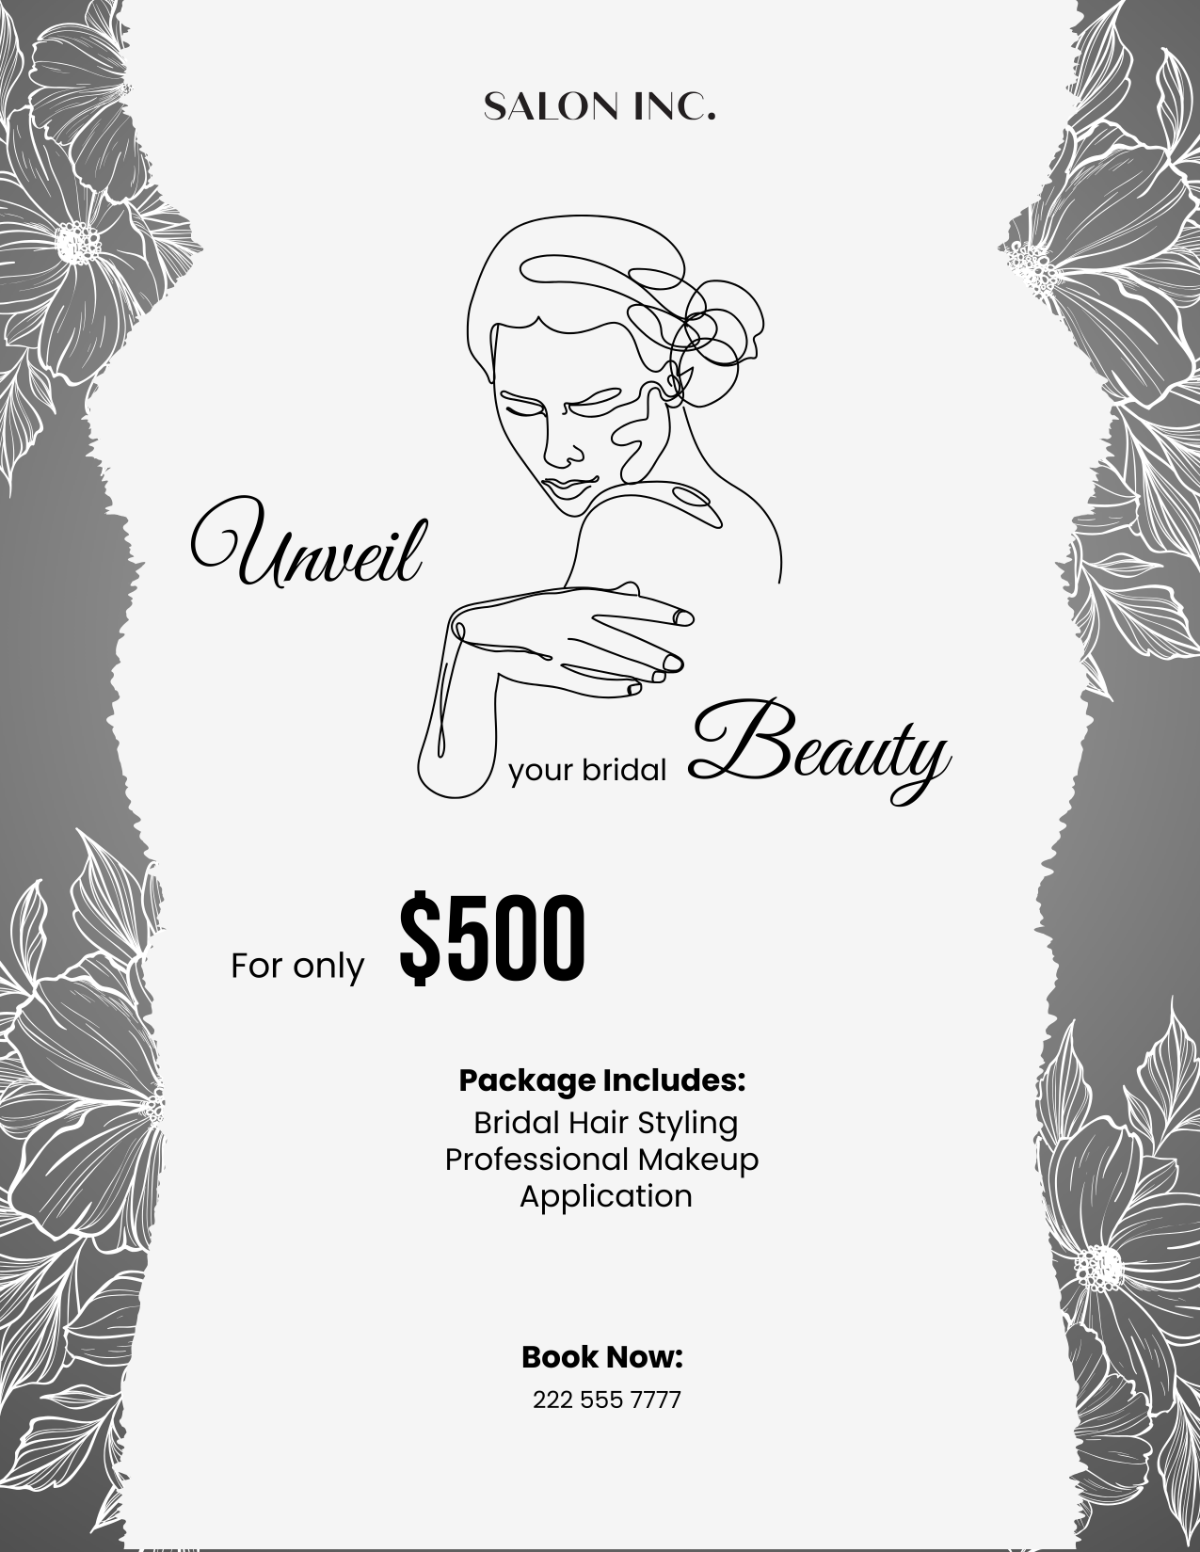 Salon Bridal Package Flyer Template